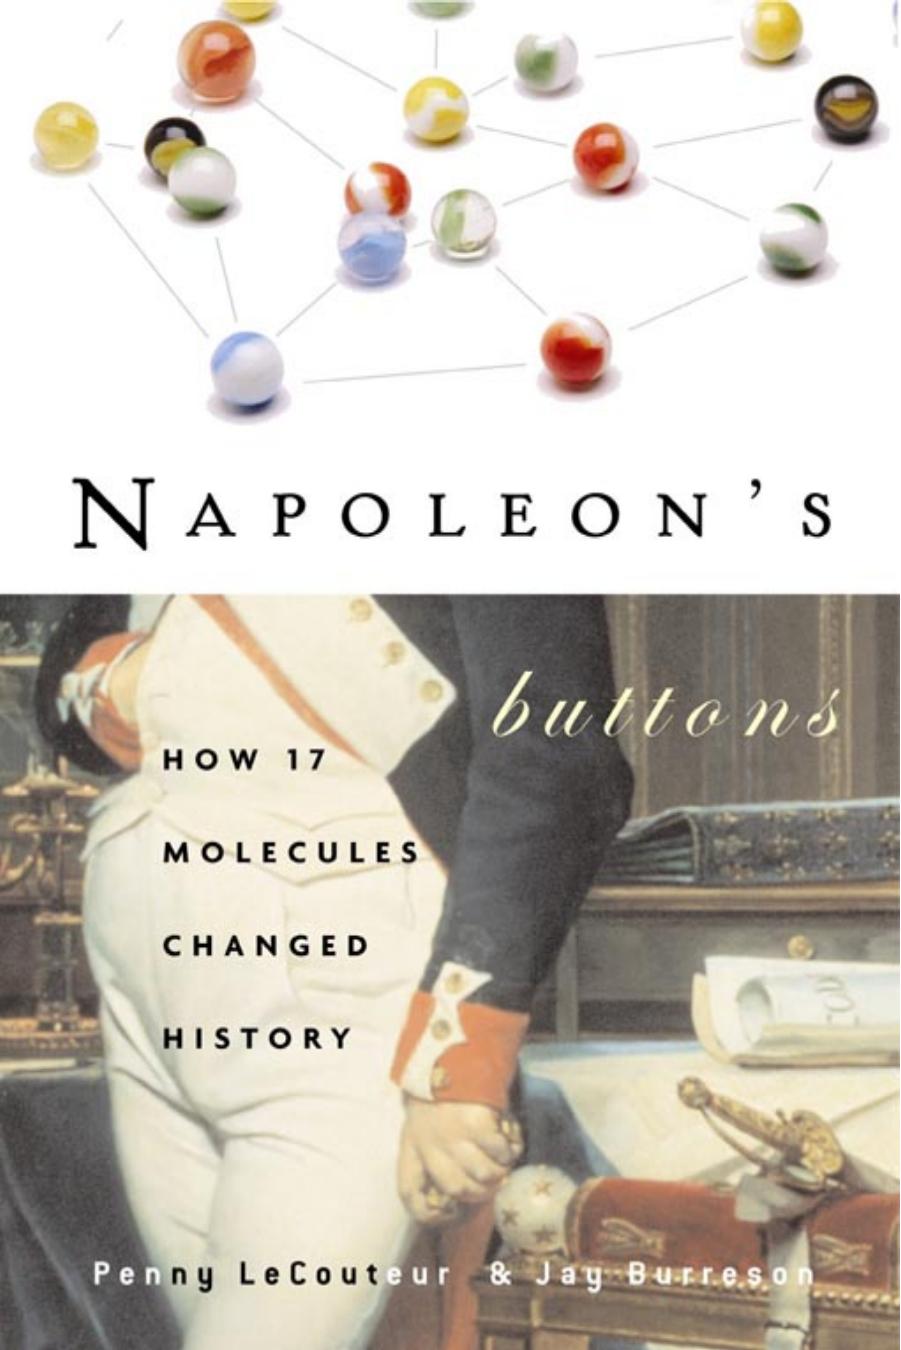 Napoleon’s Buttons_ How 17 Molecules Changed History (1991-2004)